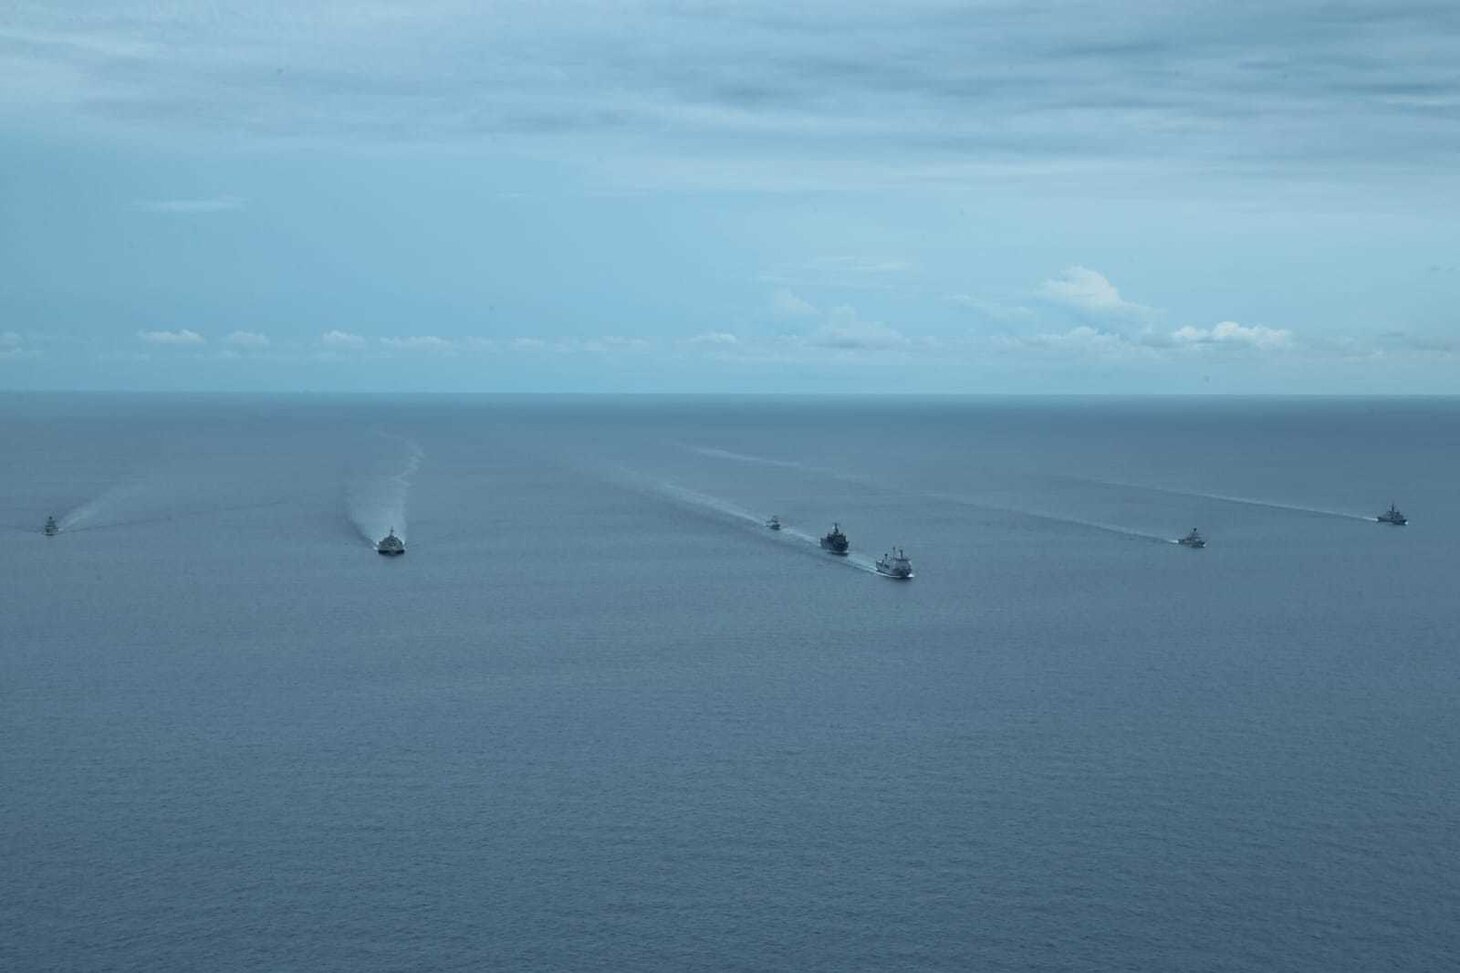 Tentera Nasional Indonesia - Angkatan Laut (TNI-AL), Republic of Singapore Navy, and U.S. Navy ships sail in formation during exercise Super Garuda Shield in the Natuna Sea Aug. 3, 2022. Garuda Shield is an annual combined and joint exercise between the Indonesian National Armed Forces and U.S. Indo-Pacific Command (INDOPACOM) designed to strengthen bilateral interoperability, capabilities, trust, and cooperation built over decades of shared experiences.